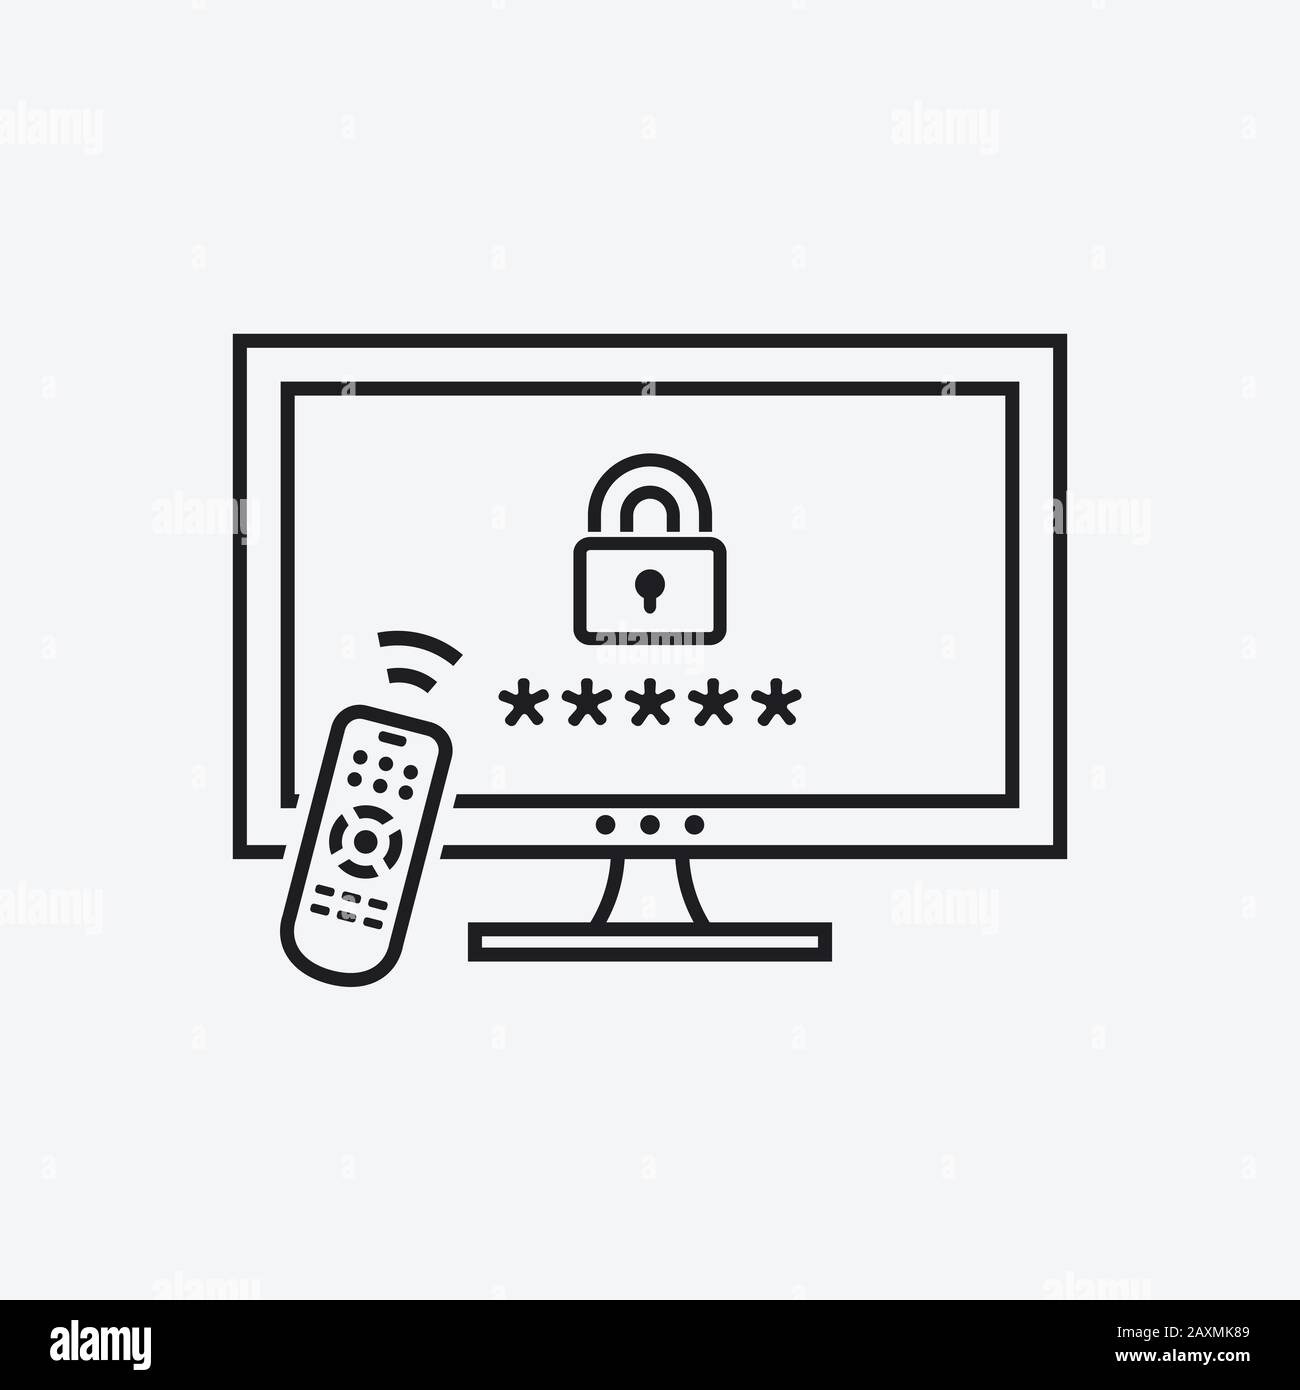 Smart TV with Parental control. Vector icon Stock Vector